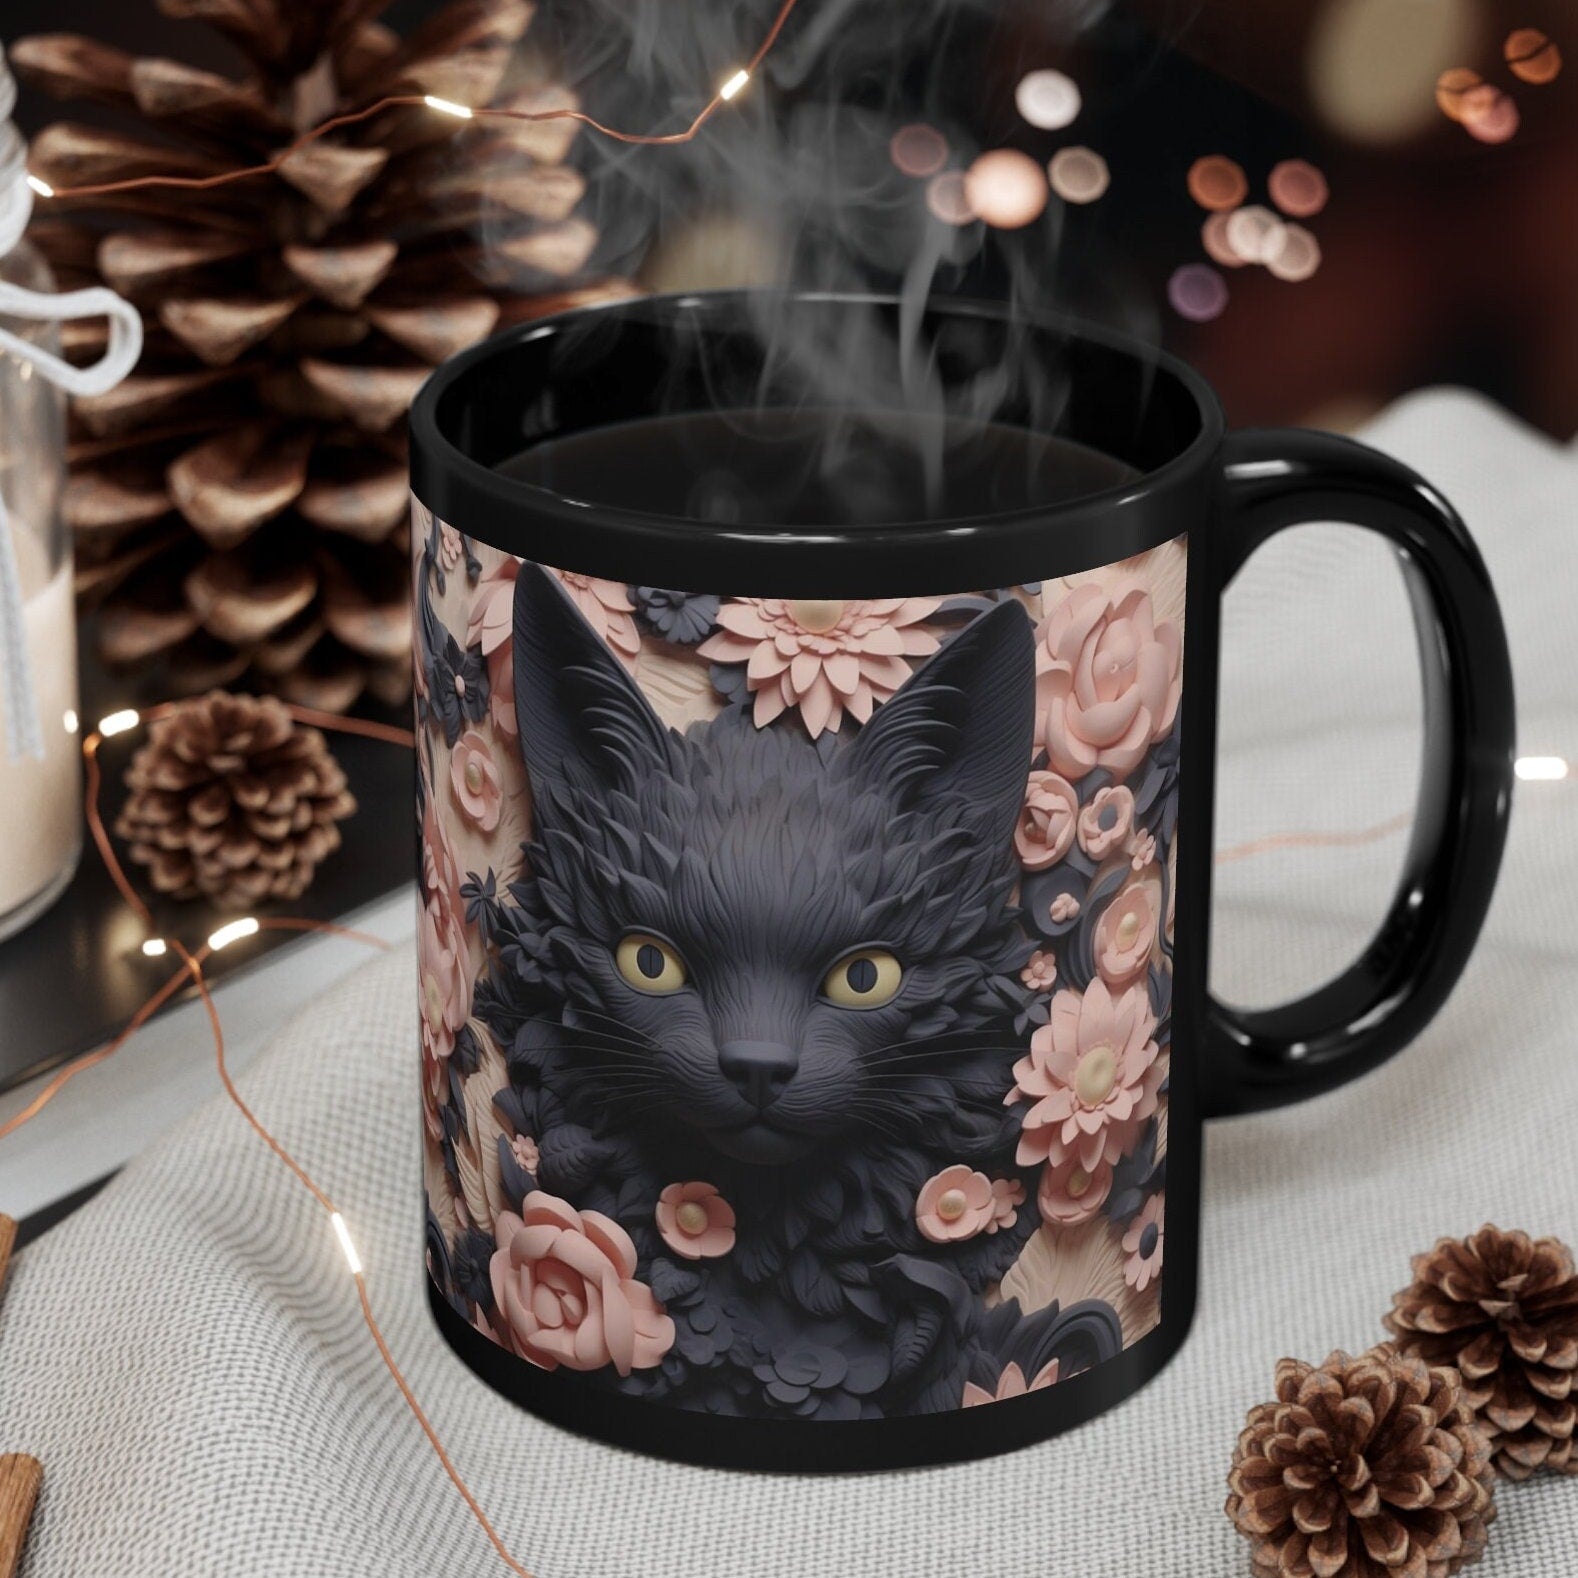 3D Black Cat Coffee Mug, Cat Mug, Great Christmas Day Gift, Cat Lover, Mom Dad Gift, 3D Cup, AI Art, Best Friend Gift